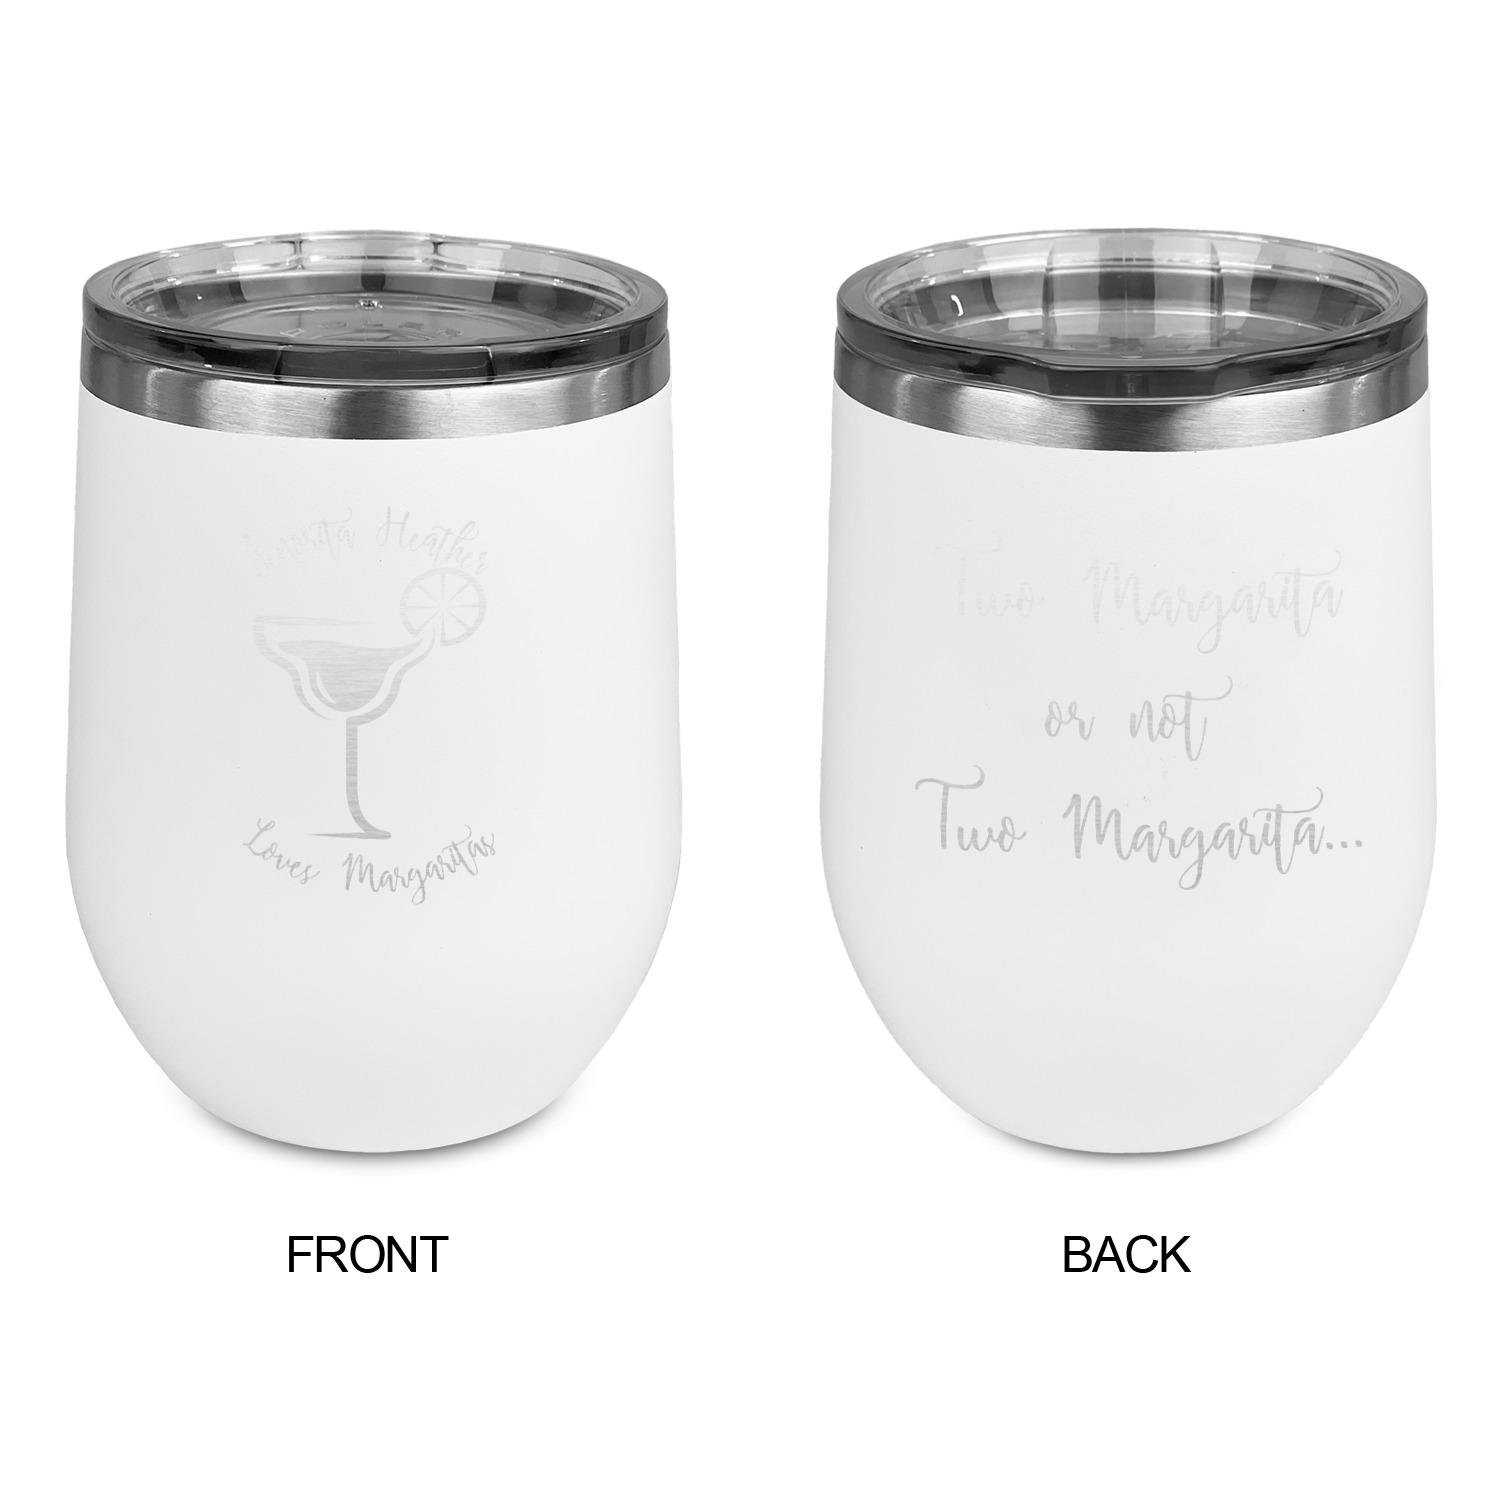 https://www.youcustomizeit.com/common/MAKE/1622723/Margarita-Lover-Stainless-Wine-Tumblers-White-Double-Sided-Approval.jpg?lm=1644257125